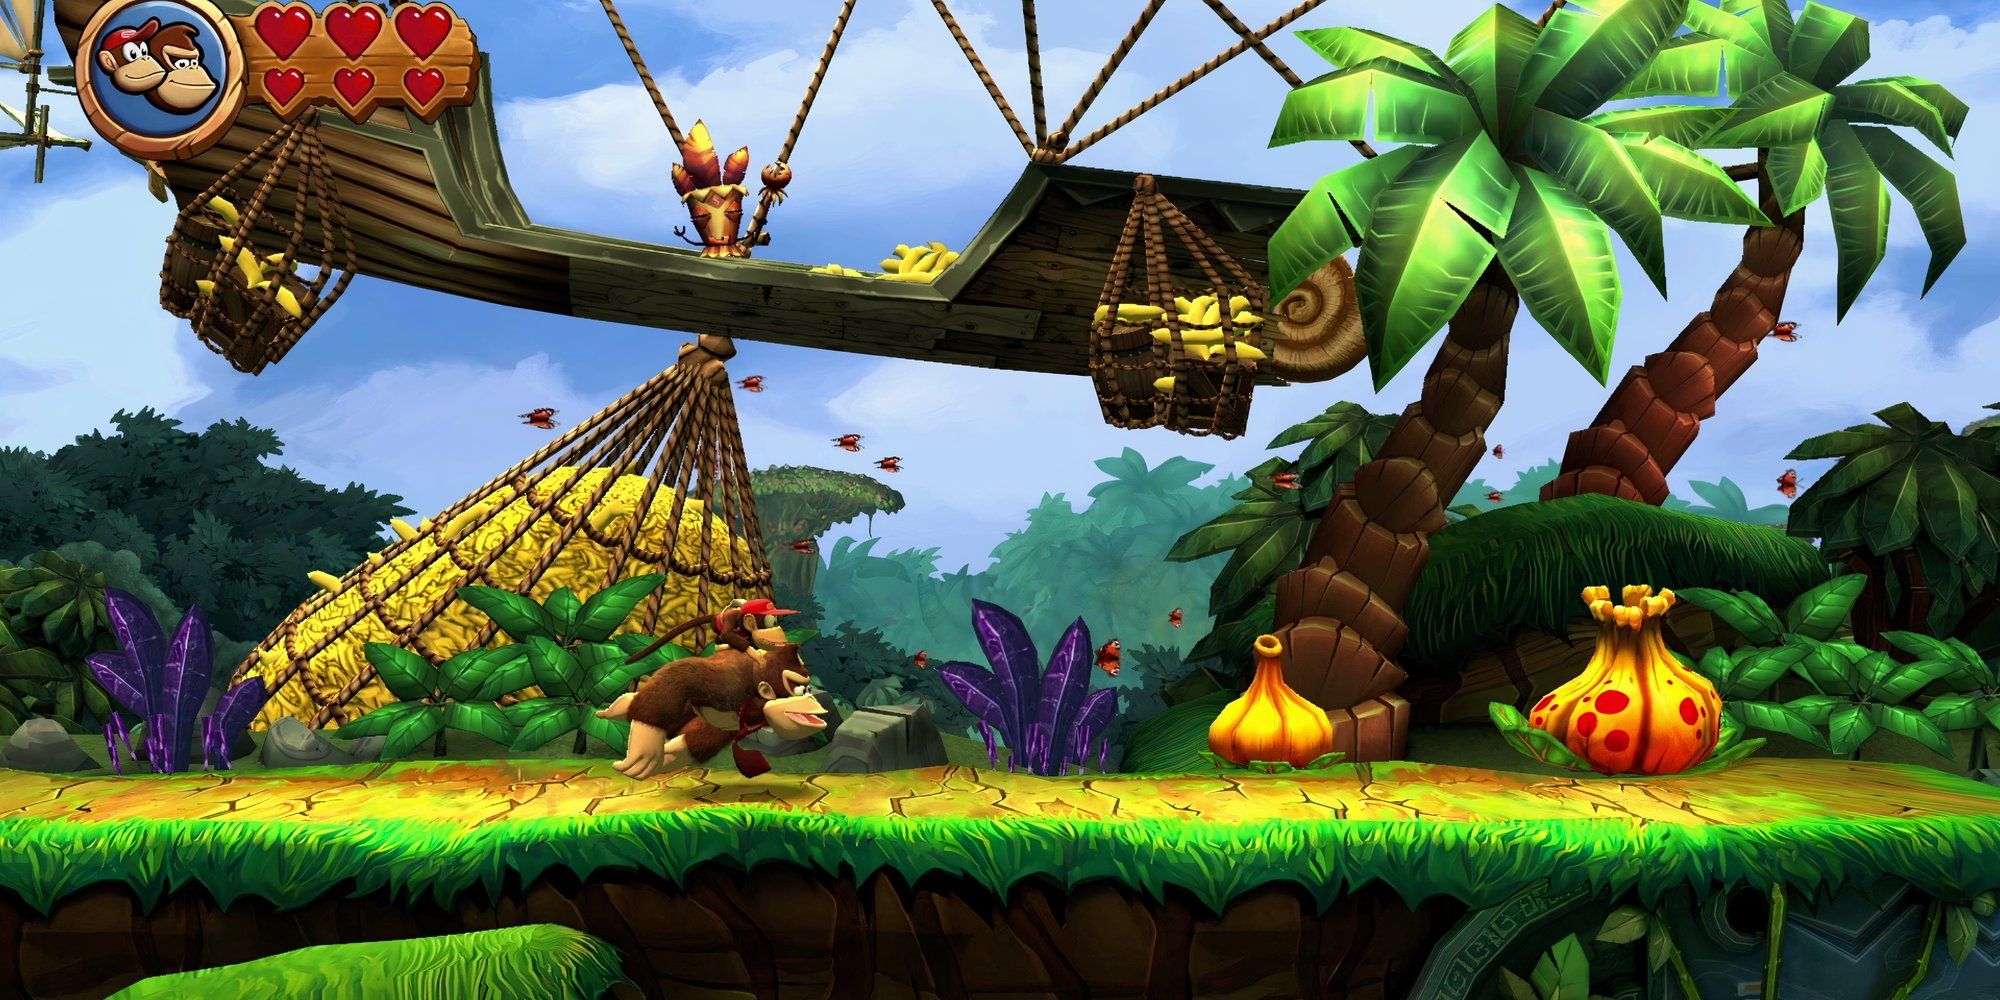 Playing a level in Donkey Kong and Diddy Kong in Donkey Kong Country Returns